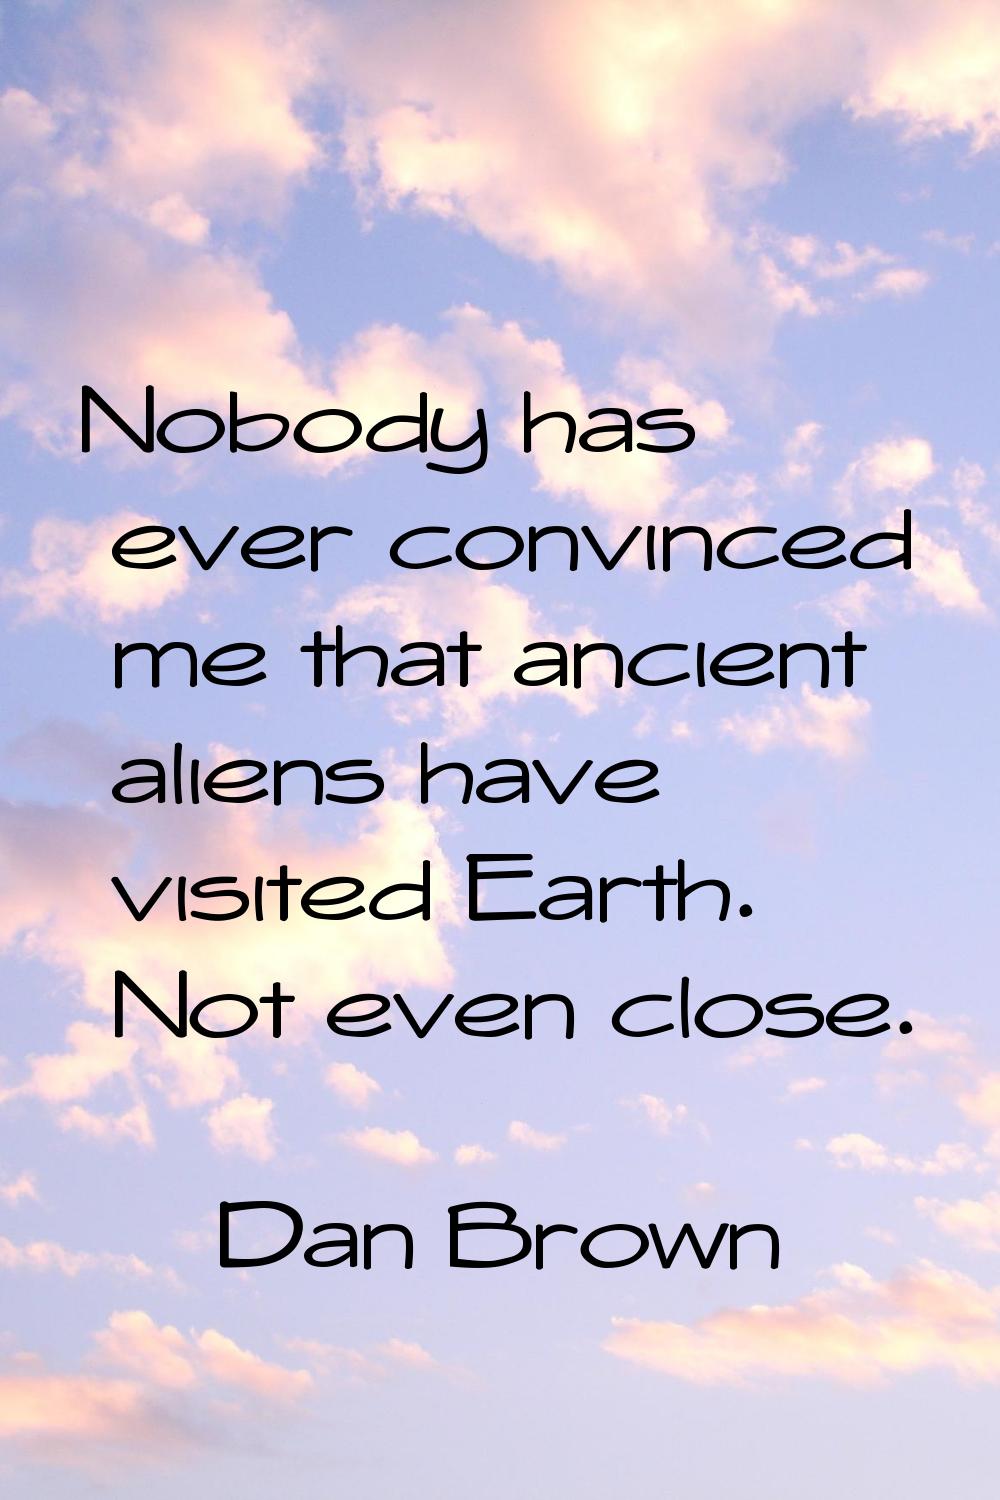 Nobody has ever convinced me that ancient aliens have visited Earth. Not even close.